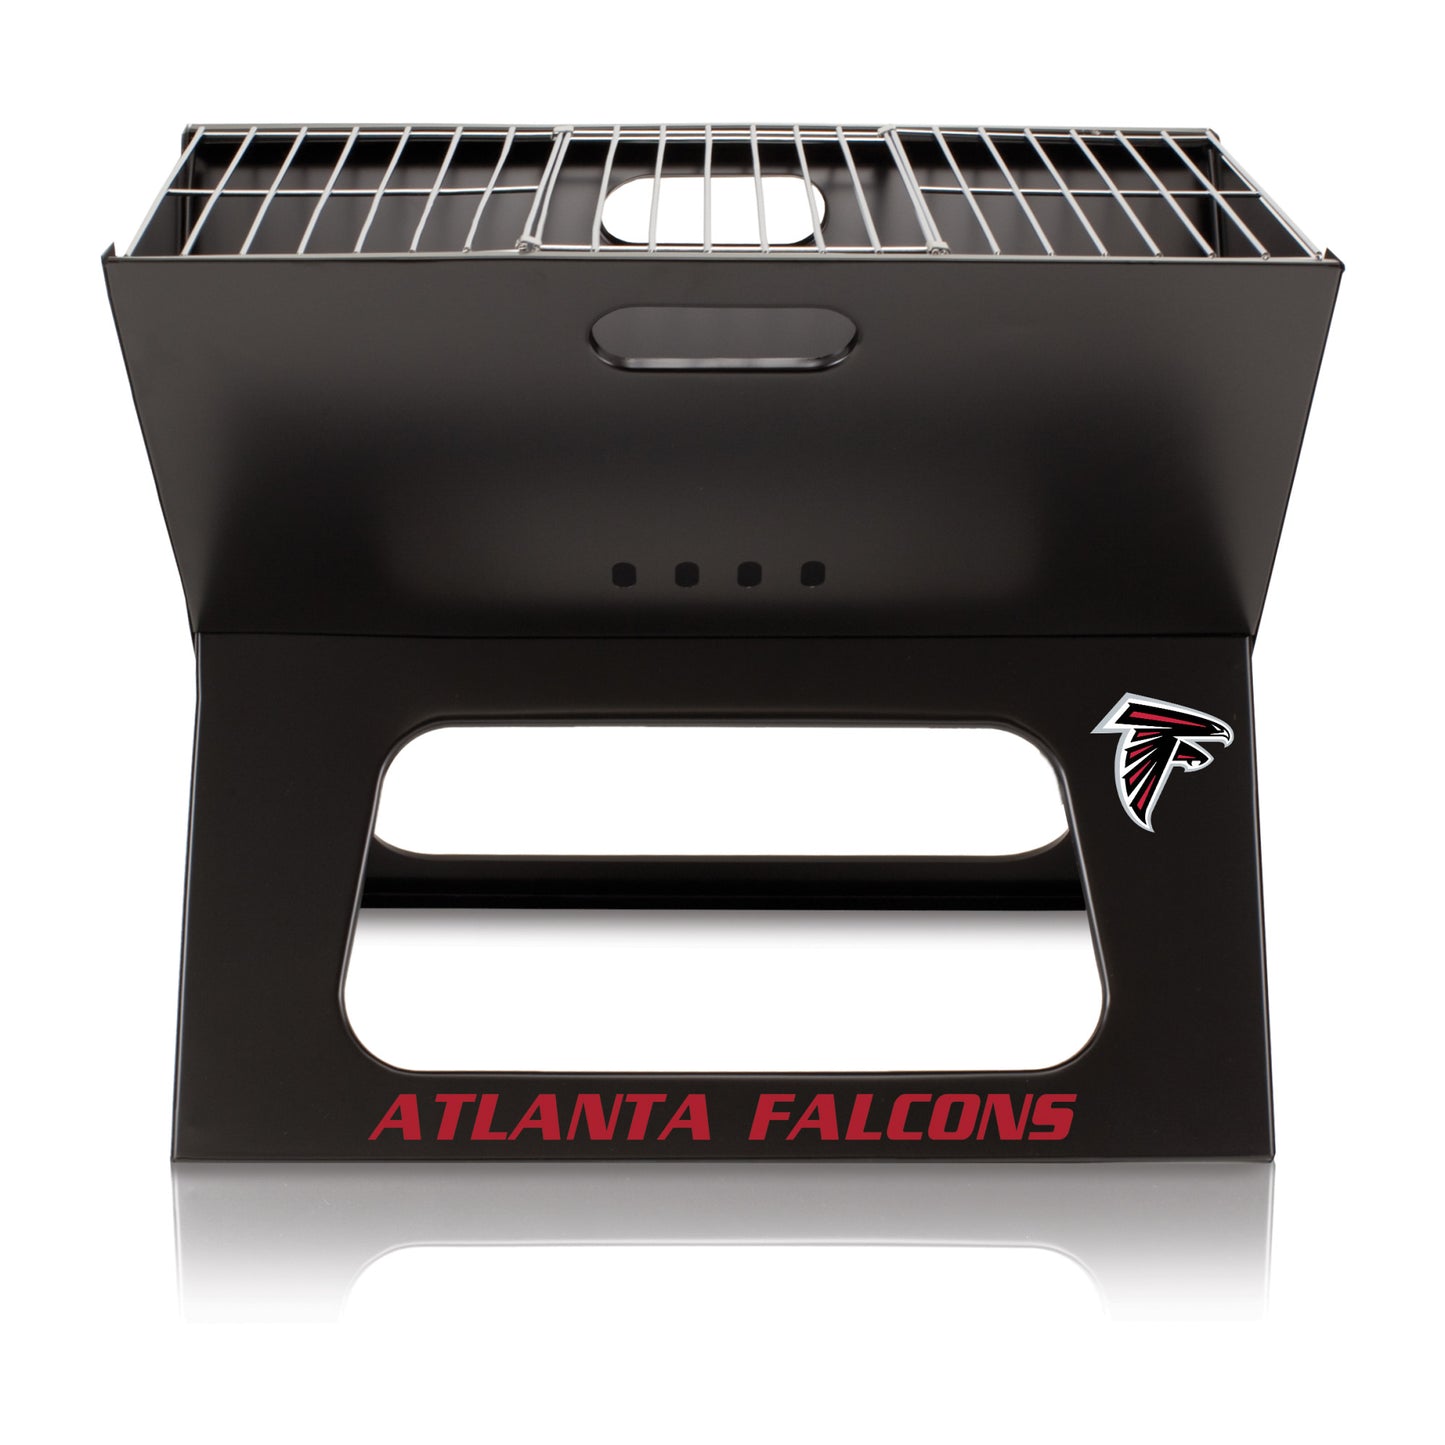 Atlanta Falcons X-Grill Portable Charcoal BBQ - Compact and easy to assemble, 203.5 sq. in. grilling surface. Officially licensed by Picnic Time.